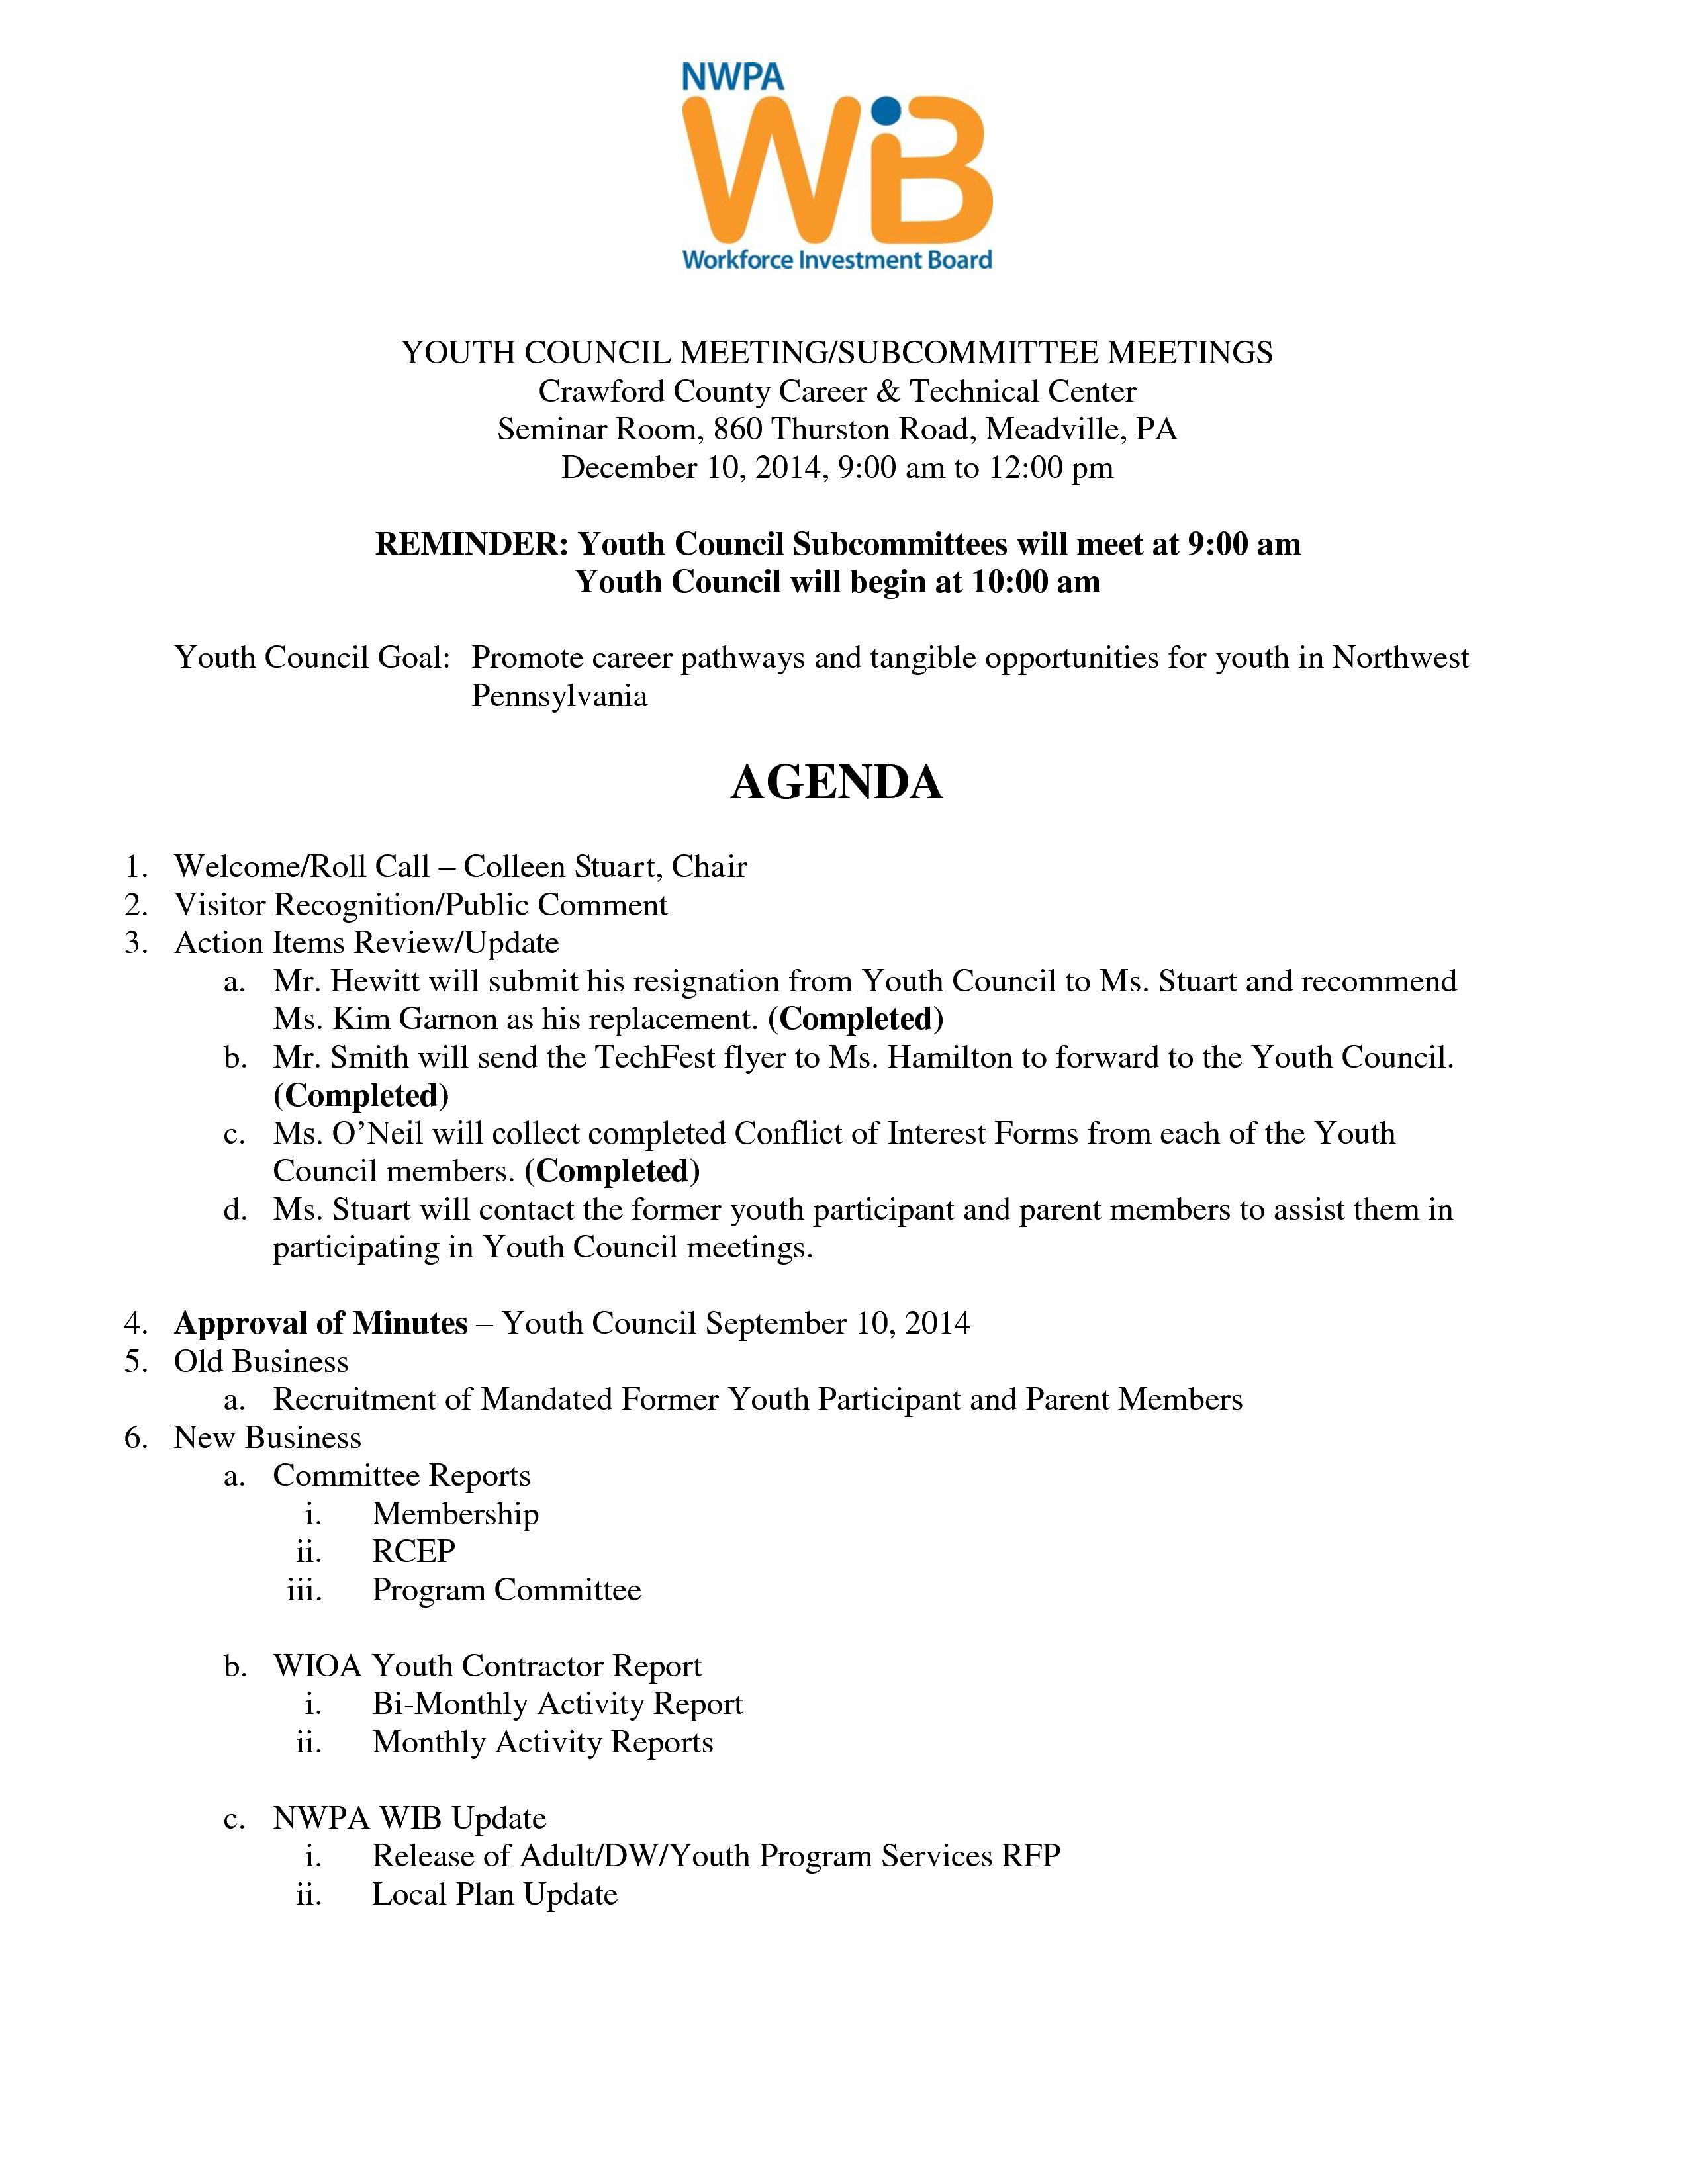 Youth Council Agenda 12-10-14